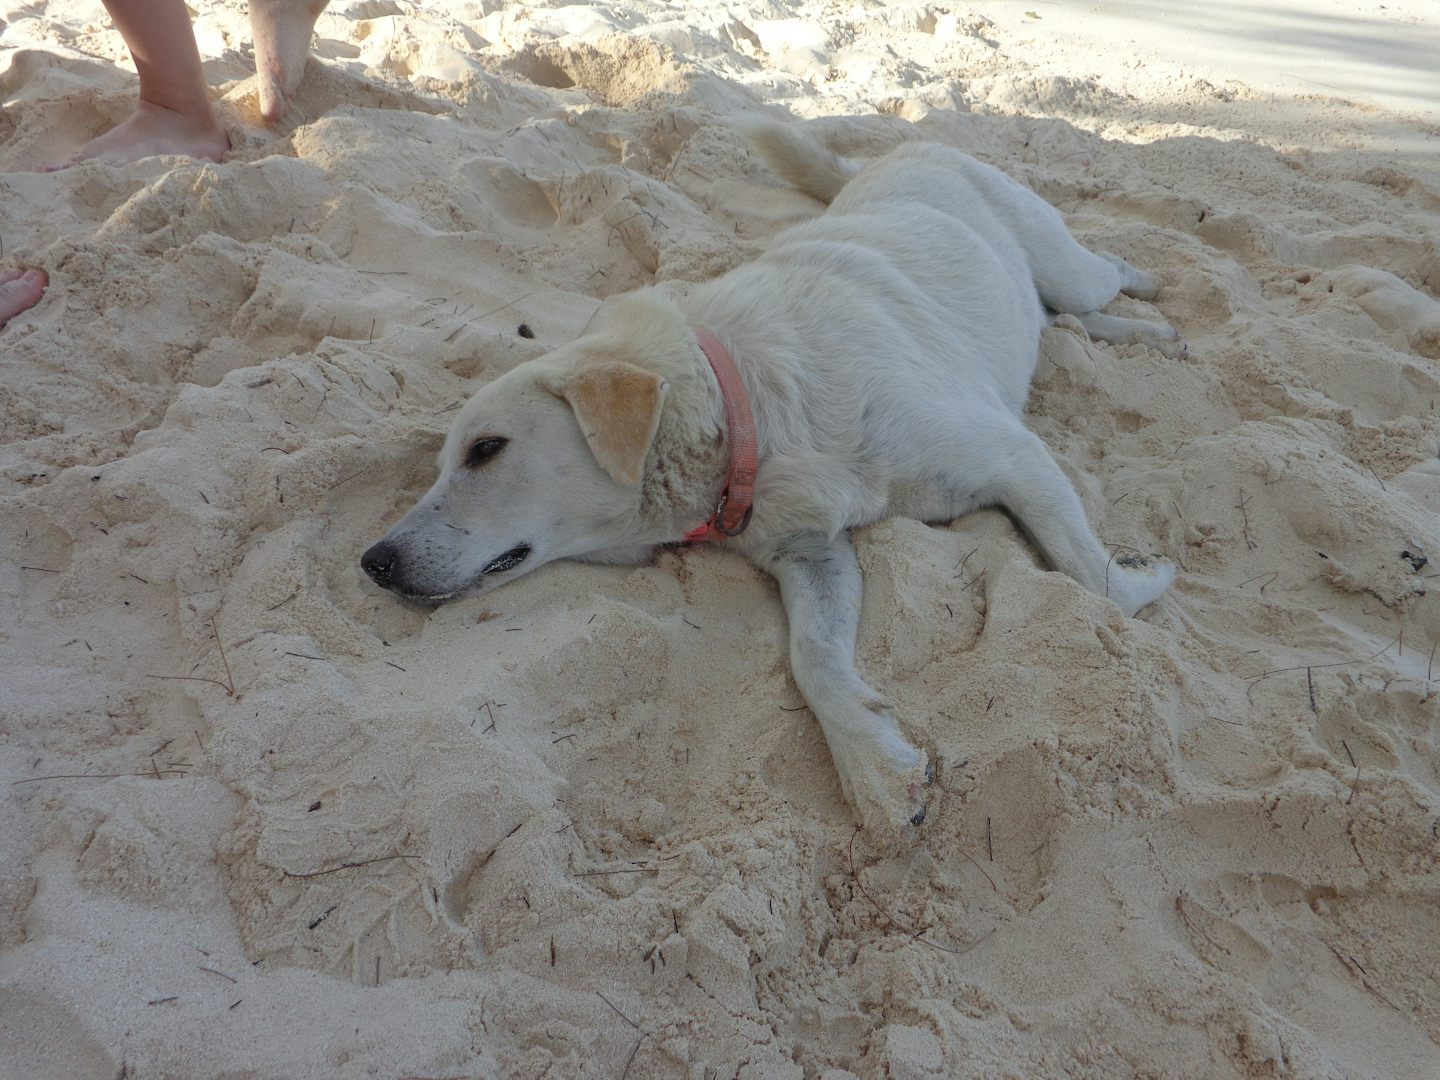 A beach dog we met in Grand Turk.  Her name was Sandy.  She blended right into the sand, we almost stepped on her!